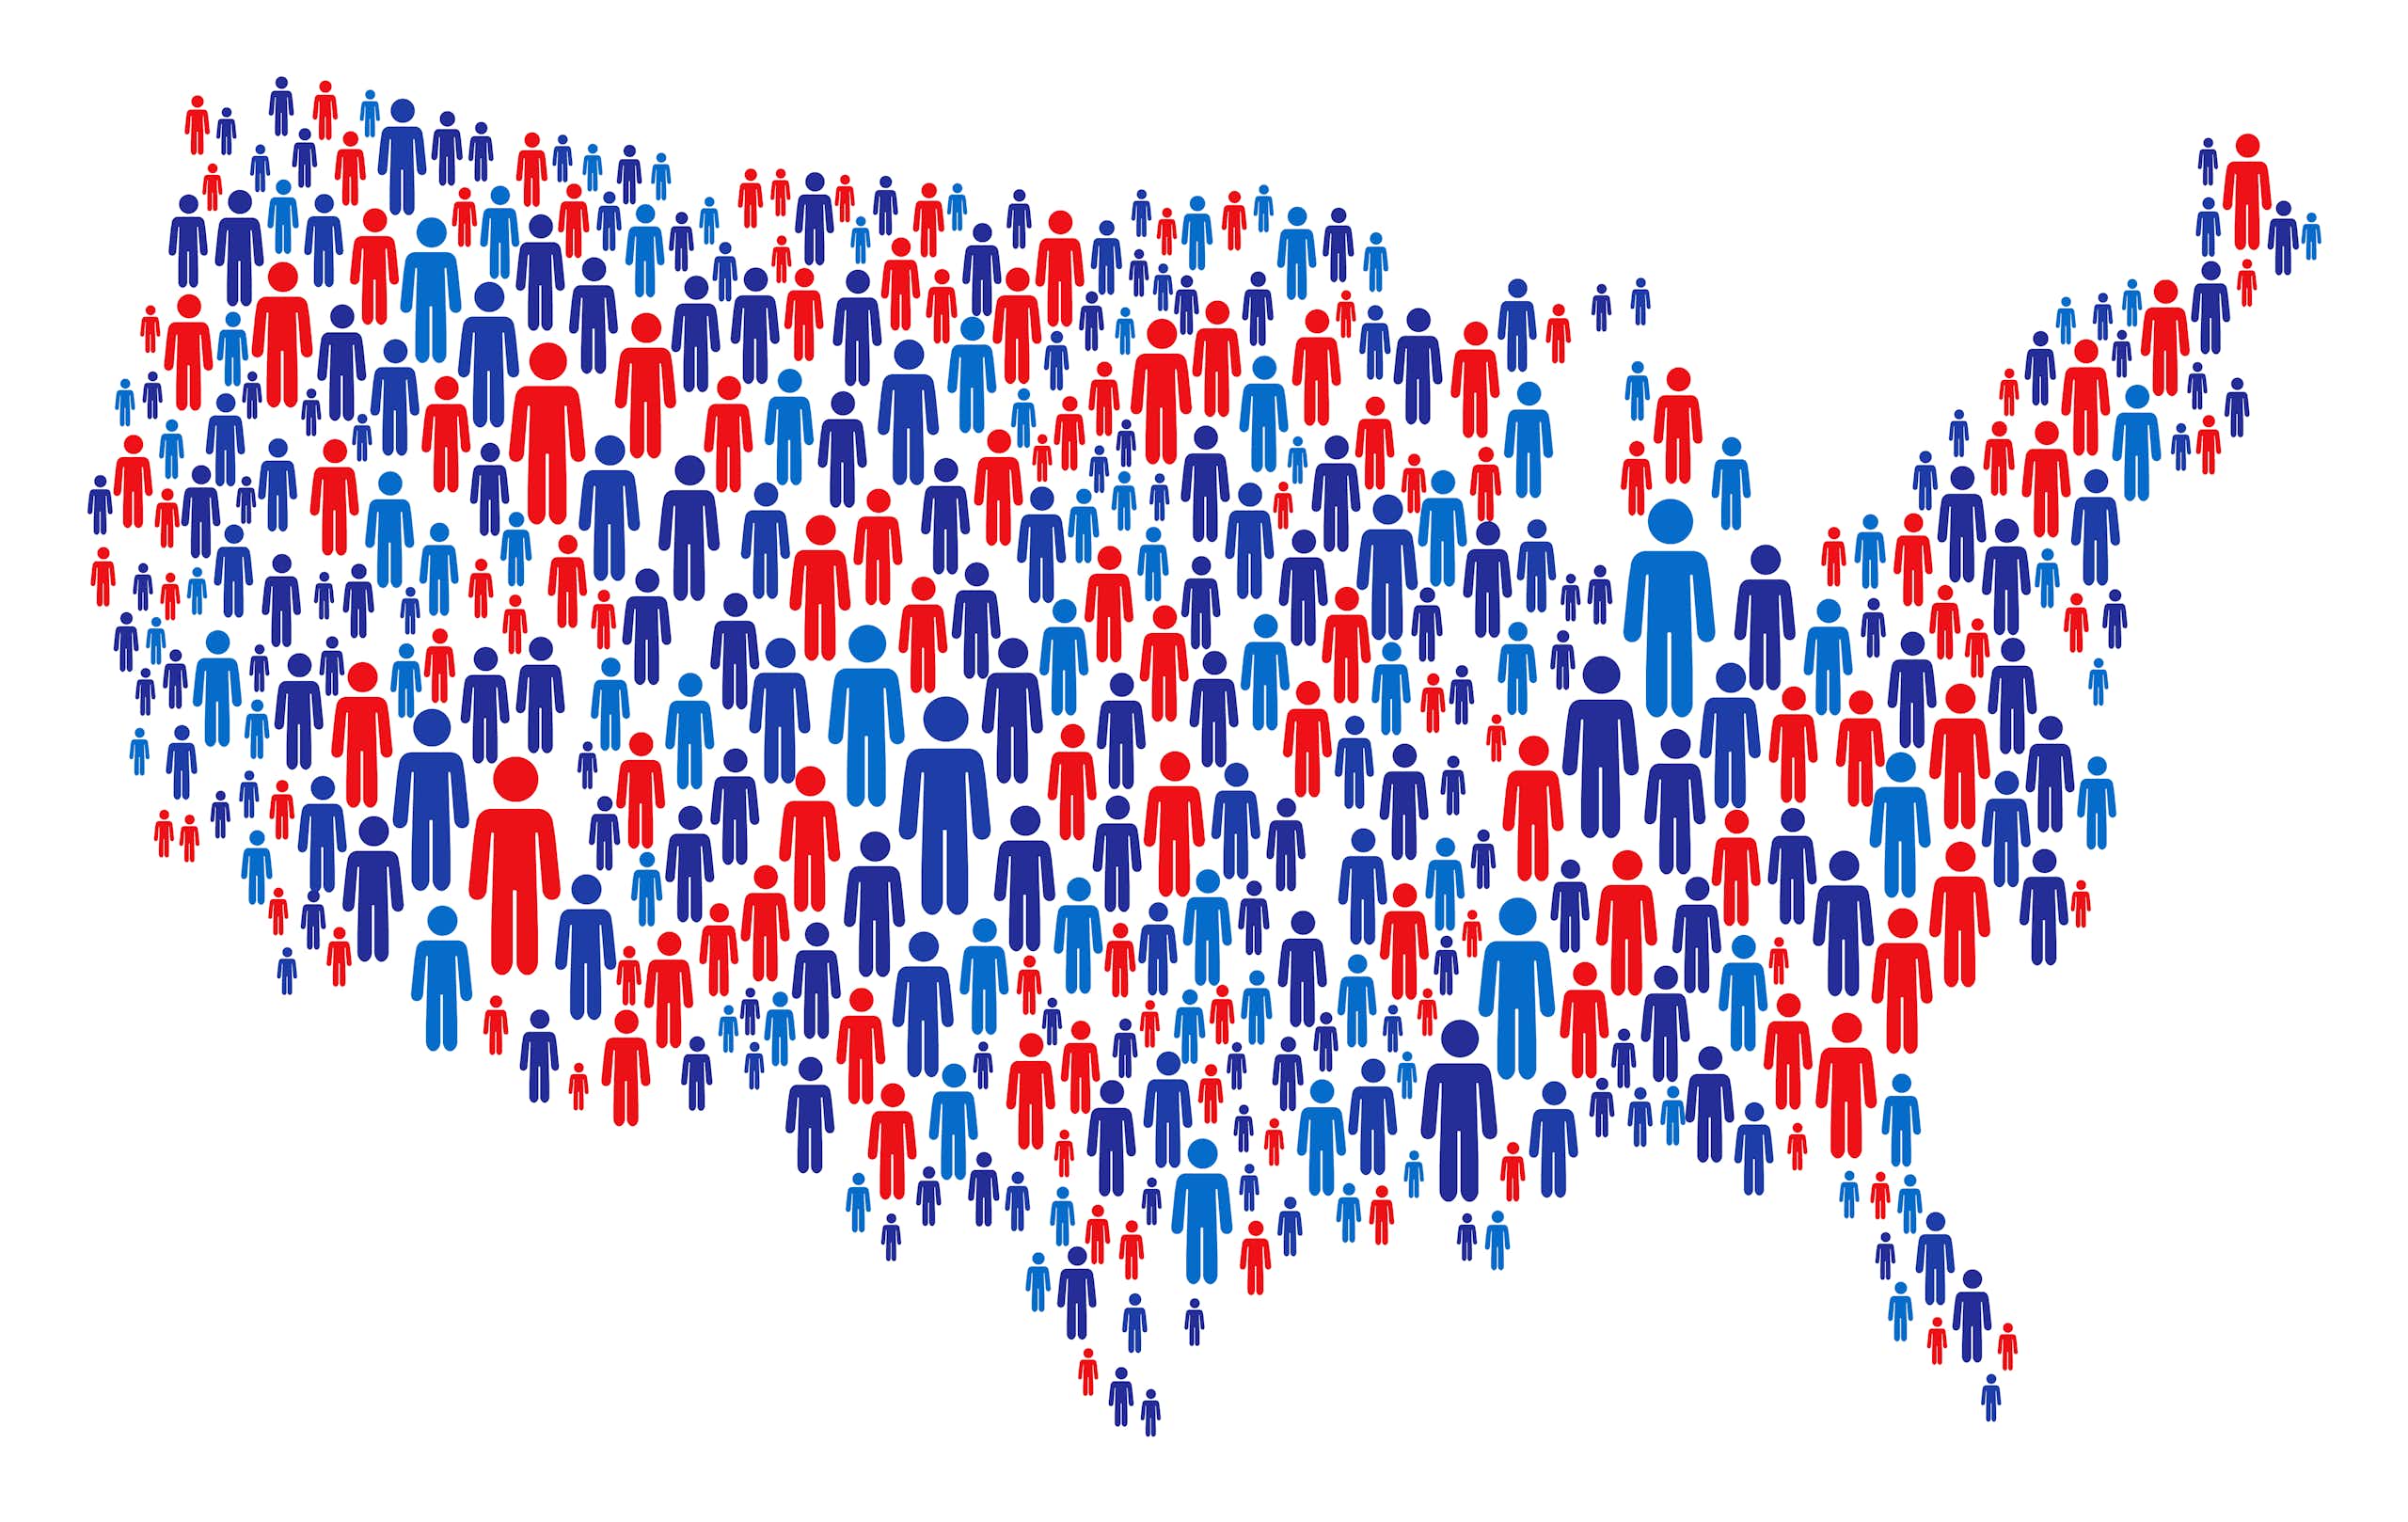 A graphic of the United States filled with figures of people.